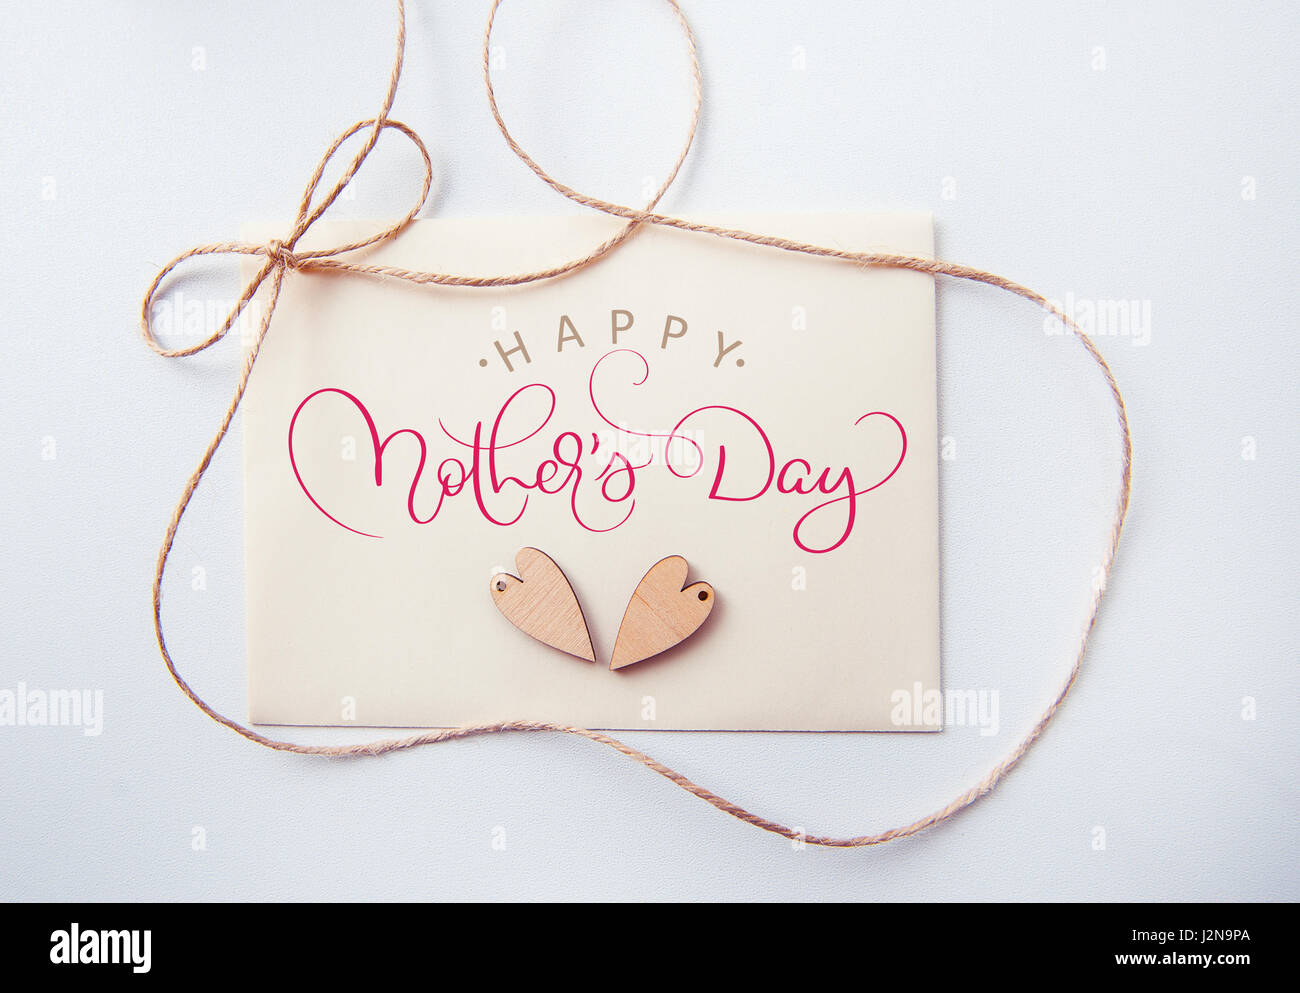 Holidays card with wooden heart and text Happy mothers day. Calligraphy lettering hand draw Stock Photo